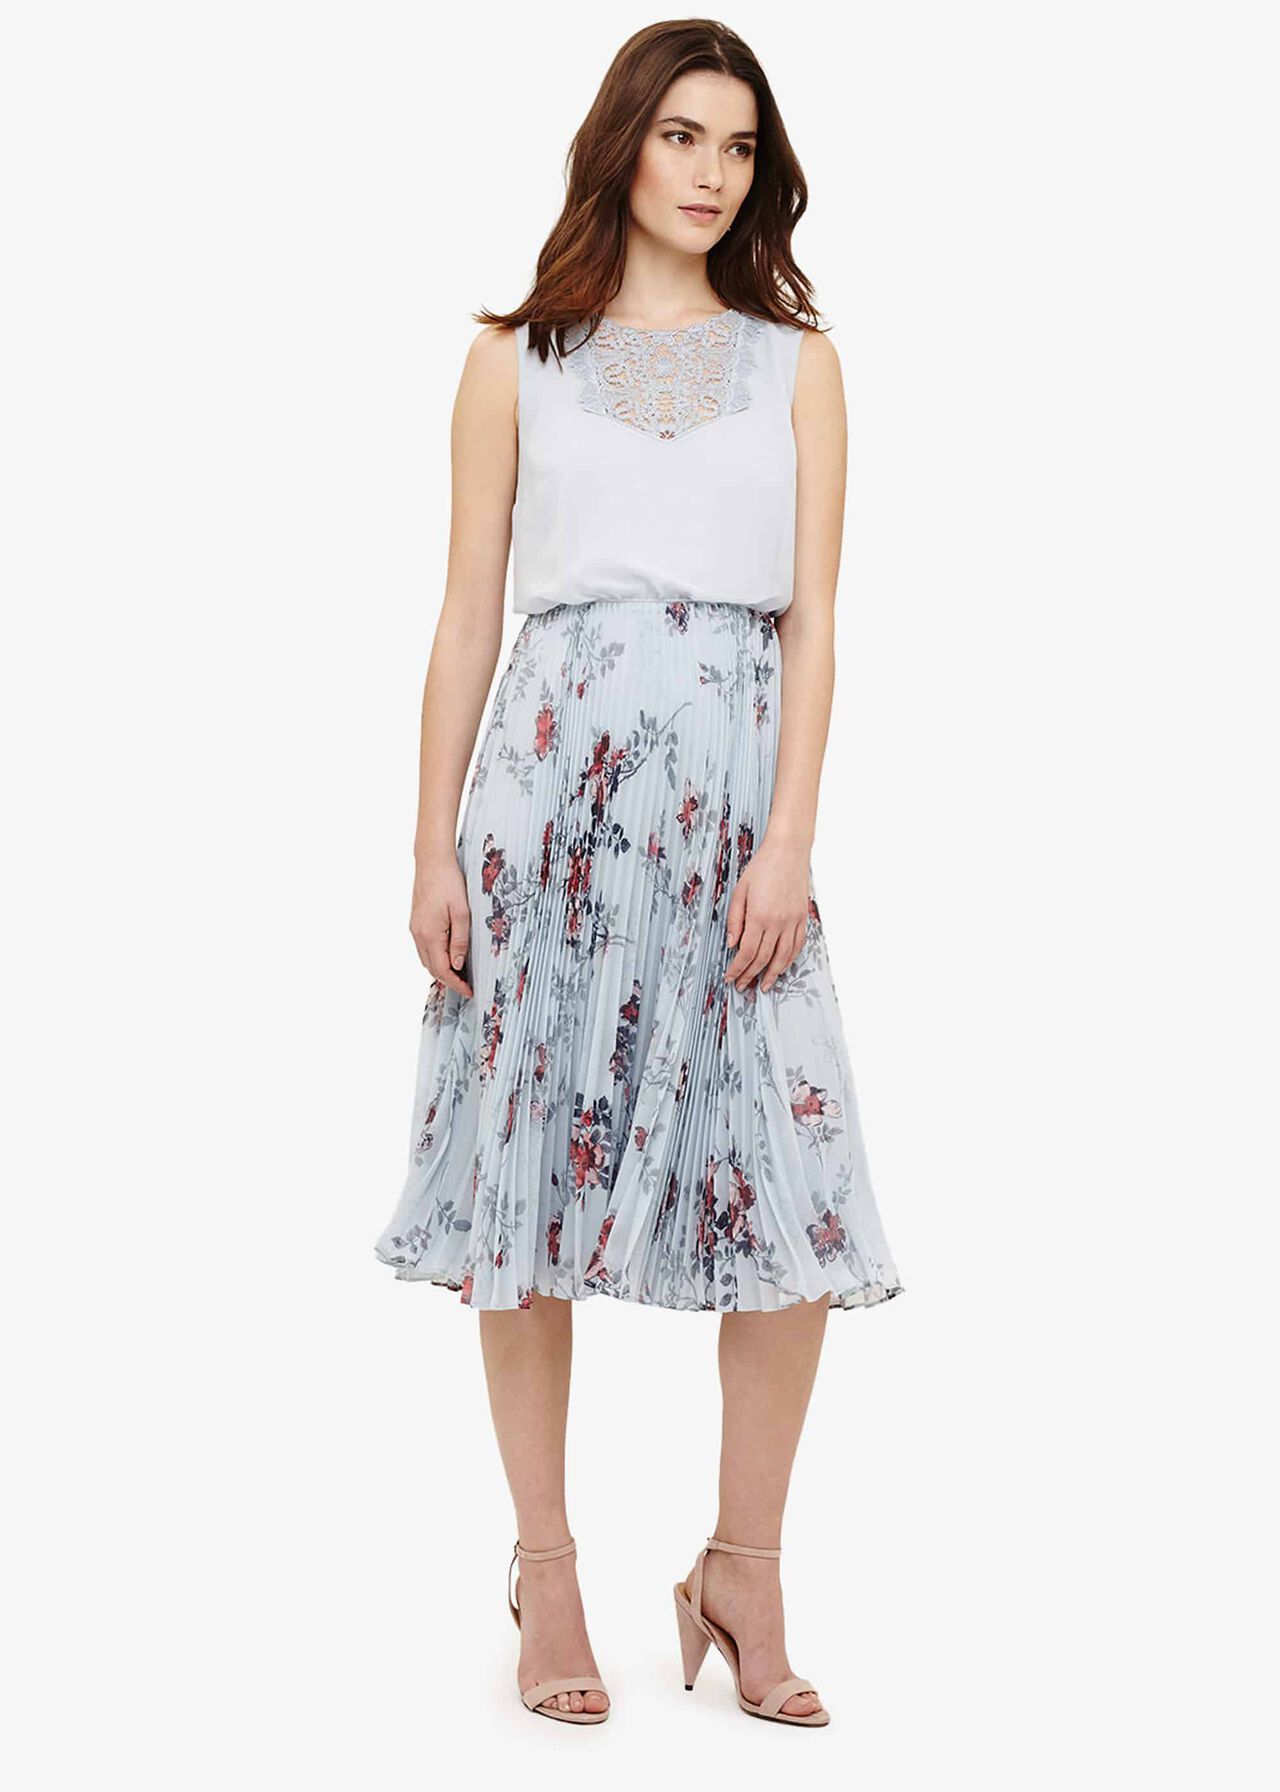 Patricia Pleated Floral Dress